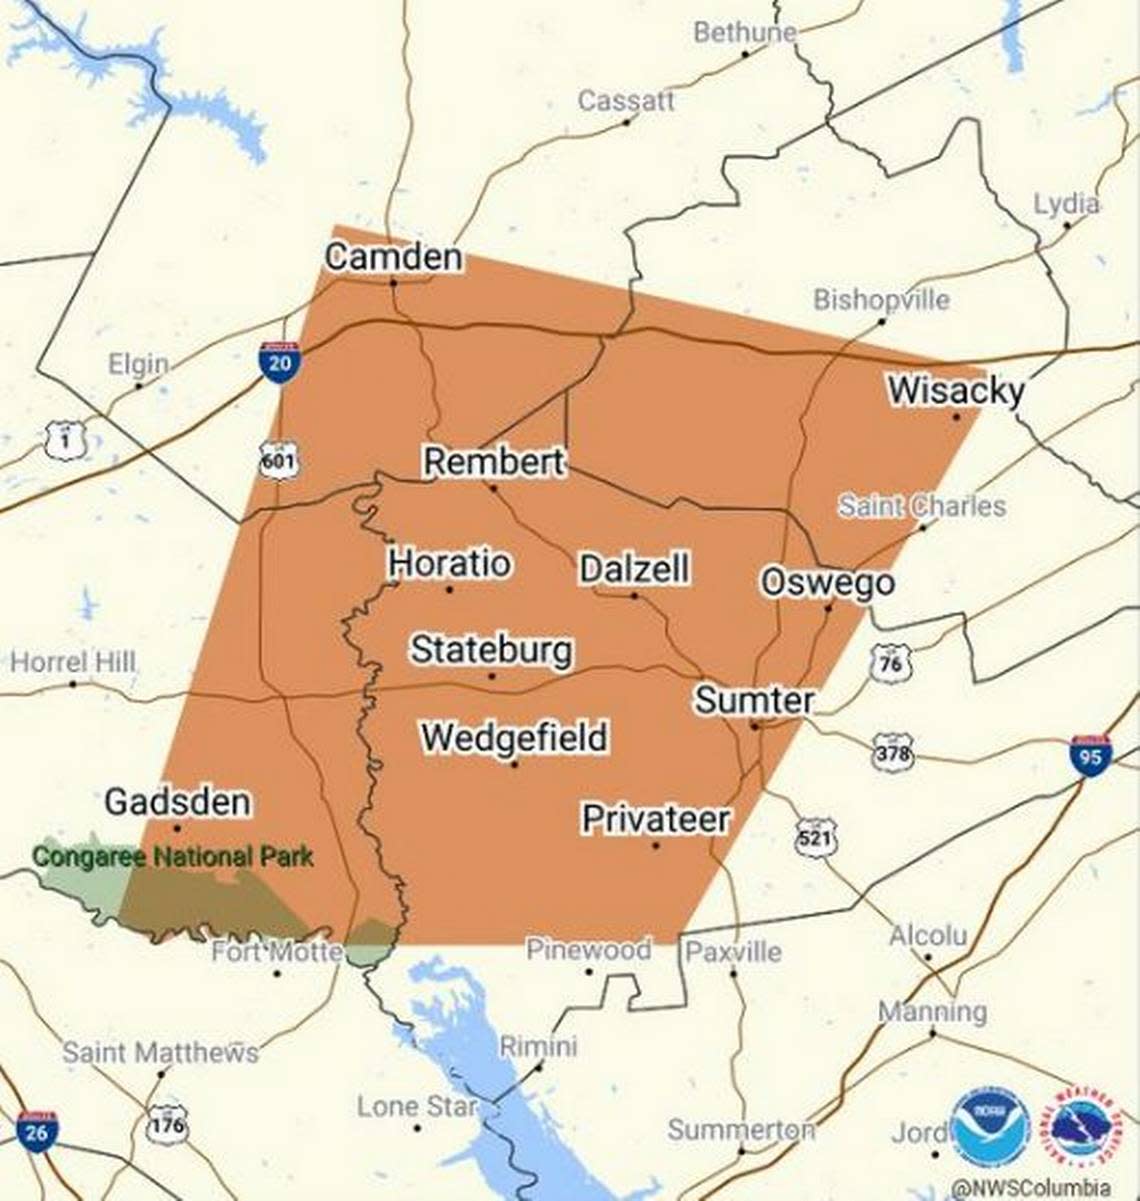 A special weather statement was issued for parts of the Midlands. National Weather Service